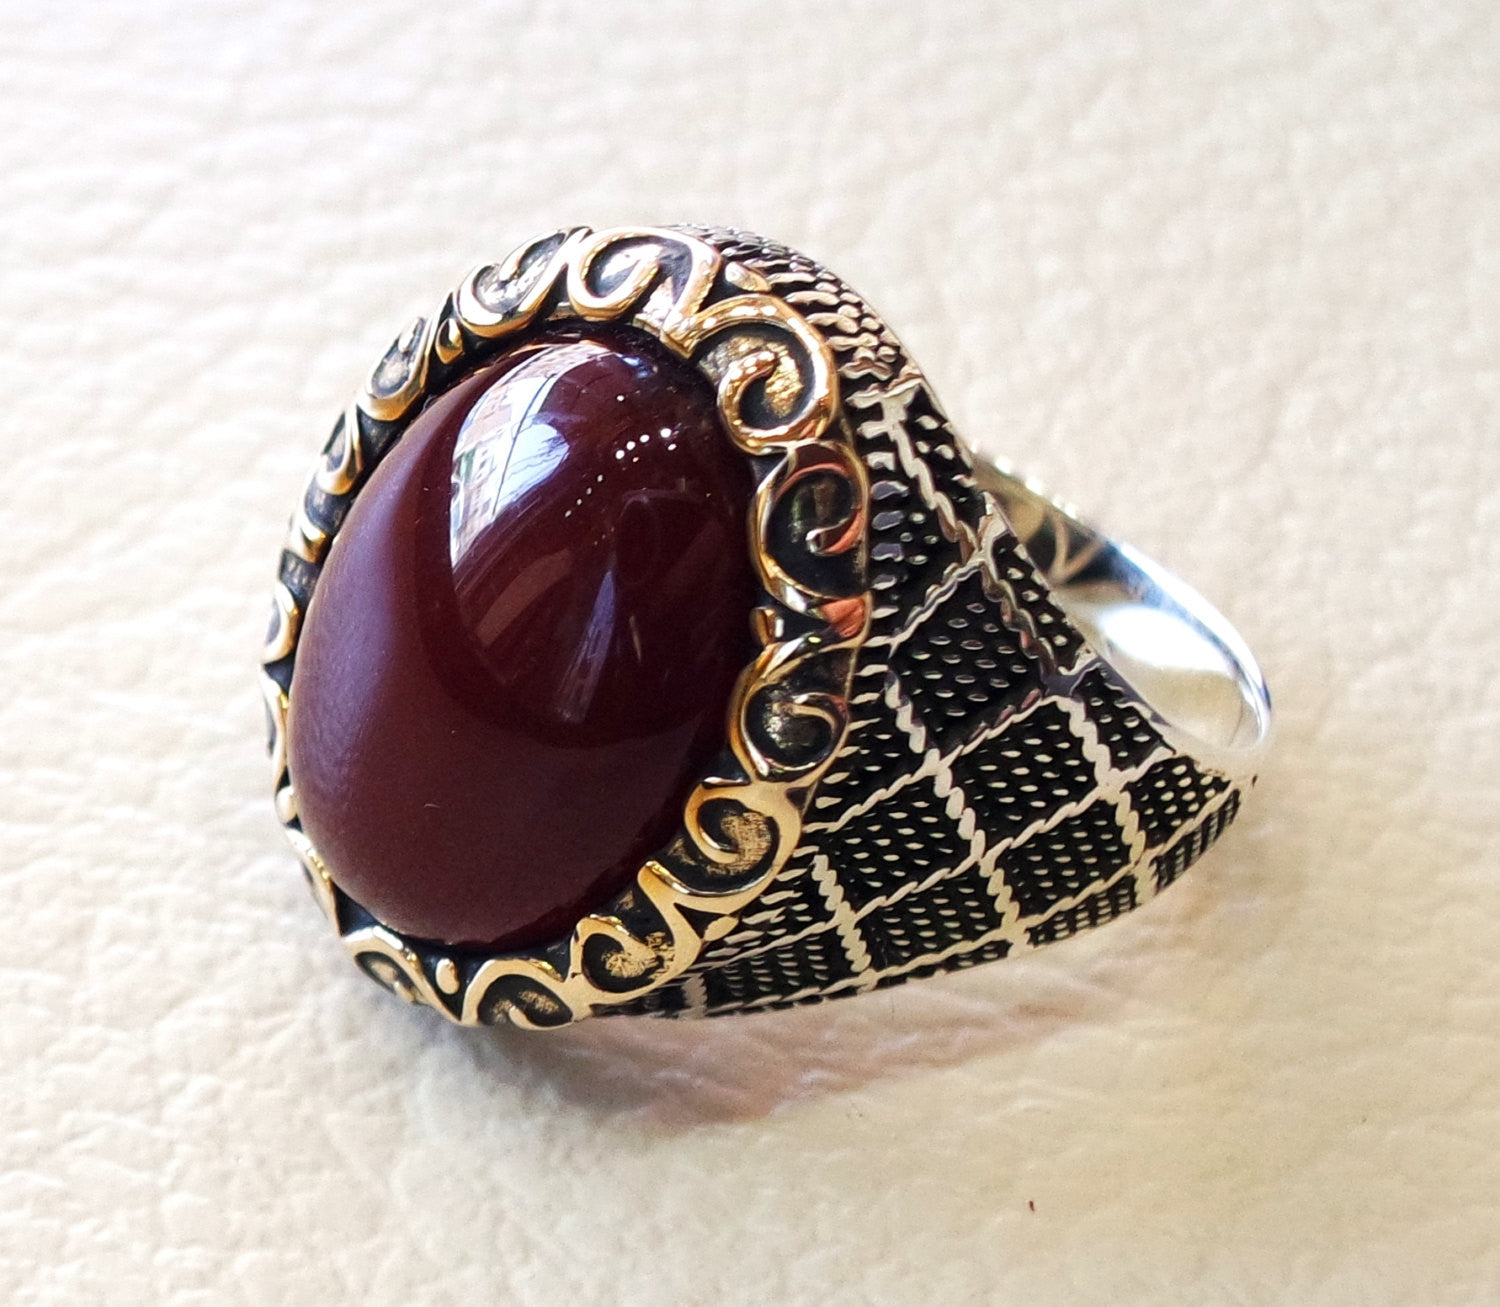 liver agate aqeeq ring sterling silver 925 ring any size antique middle eastern style dark carnelian semi precious natural cabochon عقيق